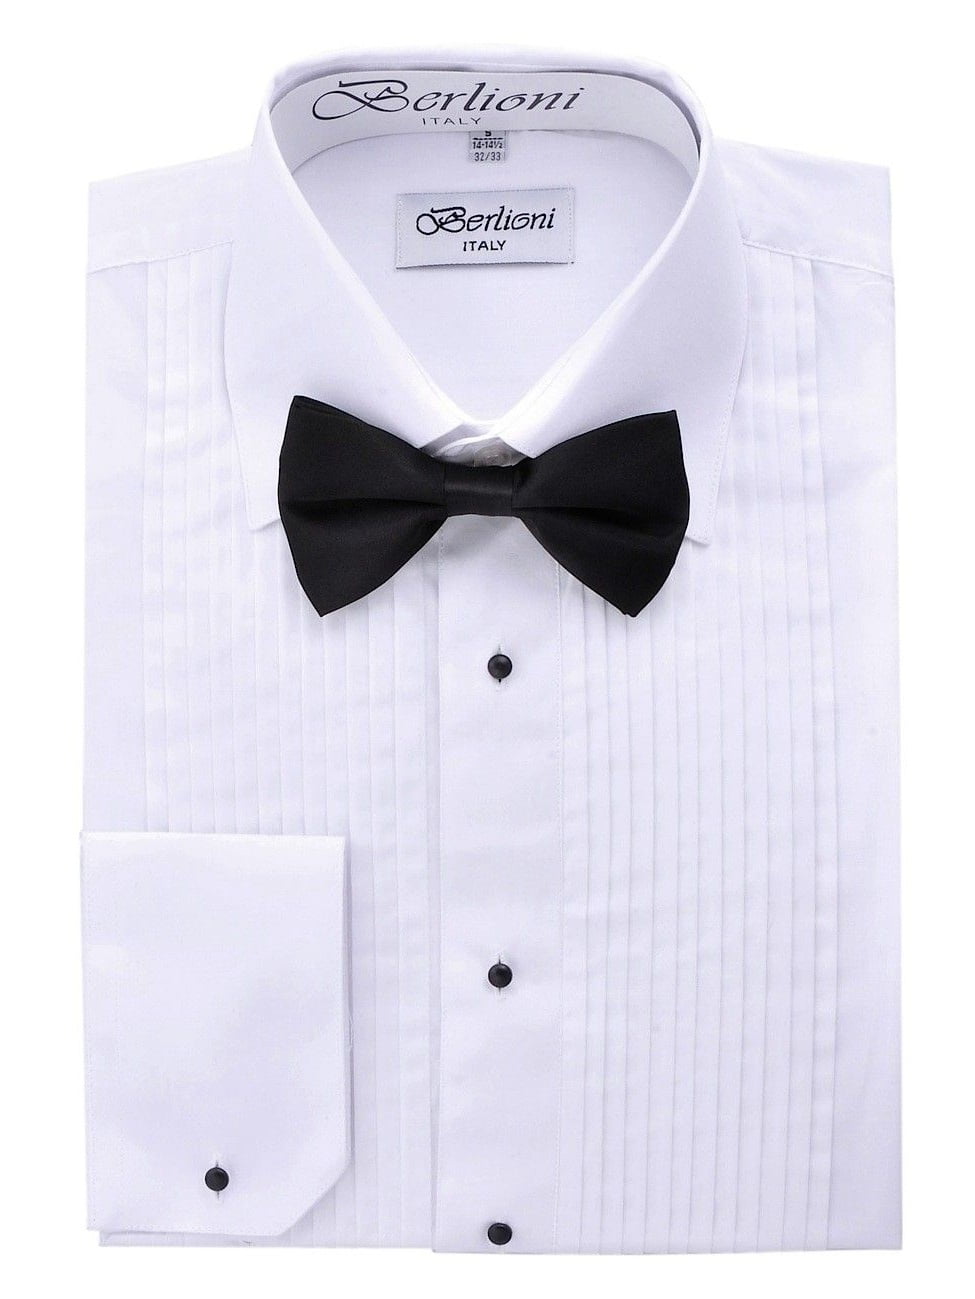 WHITE WING COLLAR SHIRT & BLACK BOW TIE NEW FACTORY SECOND SIZE 16 " 16.5 " 19 " 